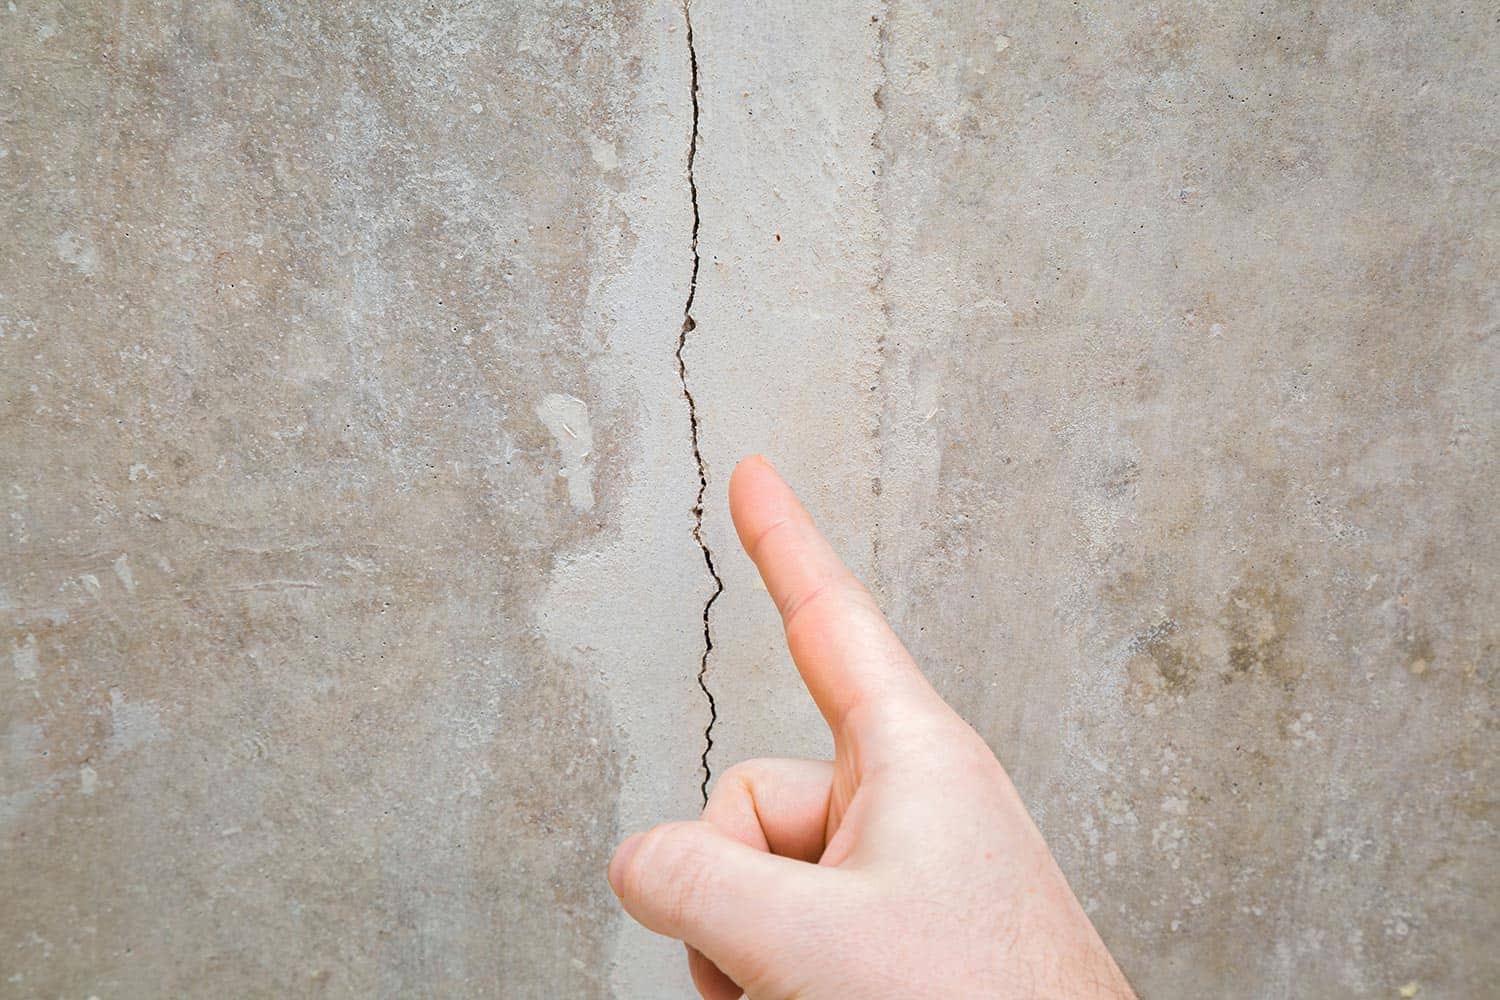 Finger pointing to cracked ceiling